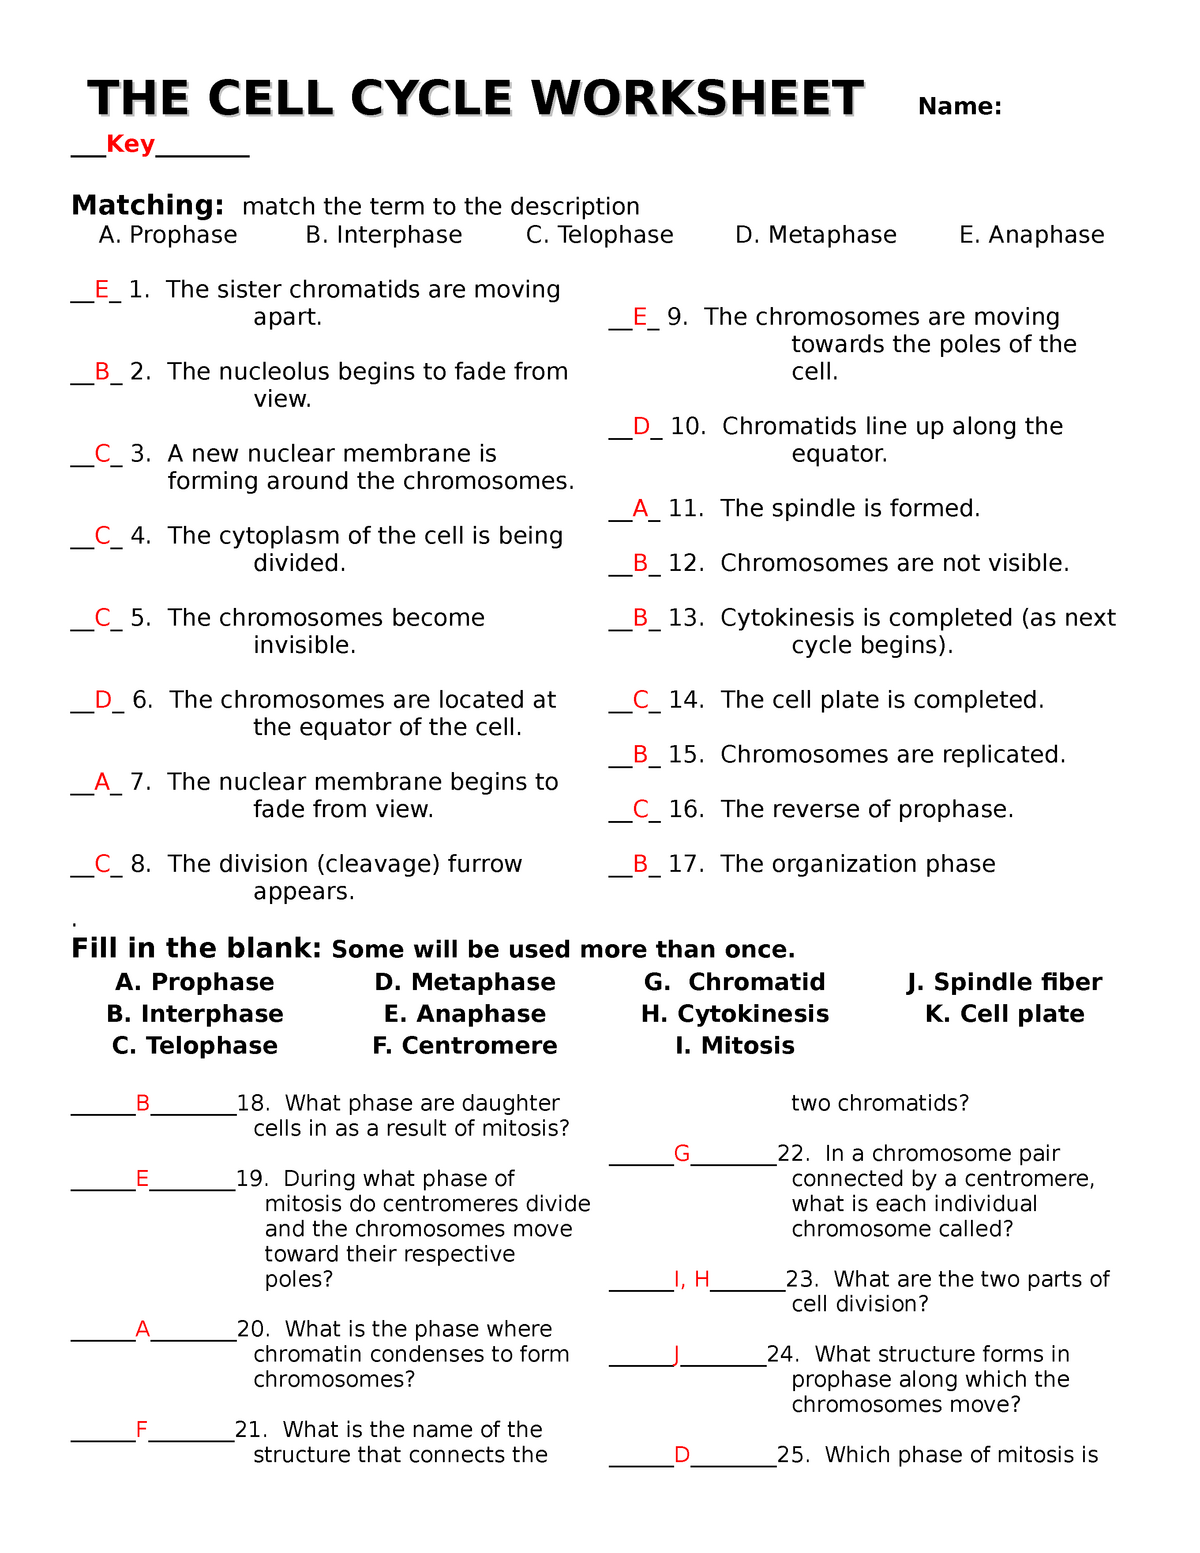 The-cell-cycle-worksheet with answers - StuDocu Pertaining To The Cell Cycle Worksheet Answers